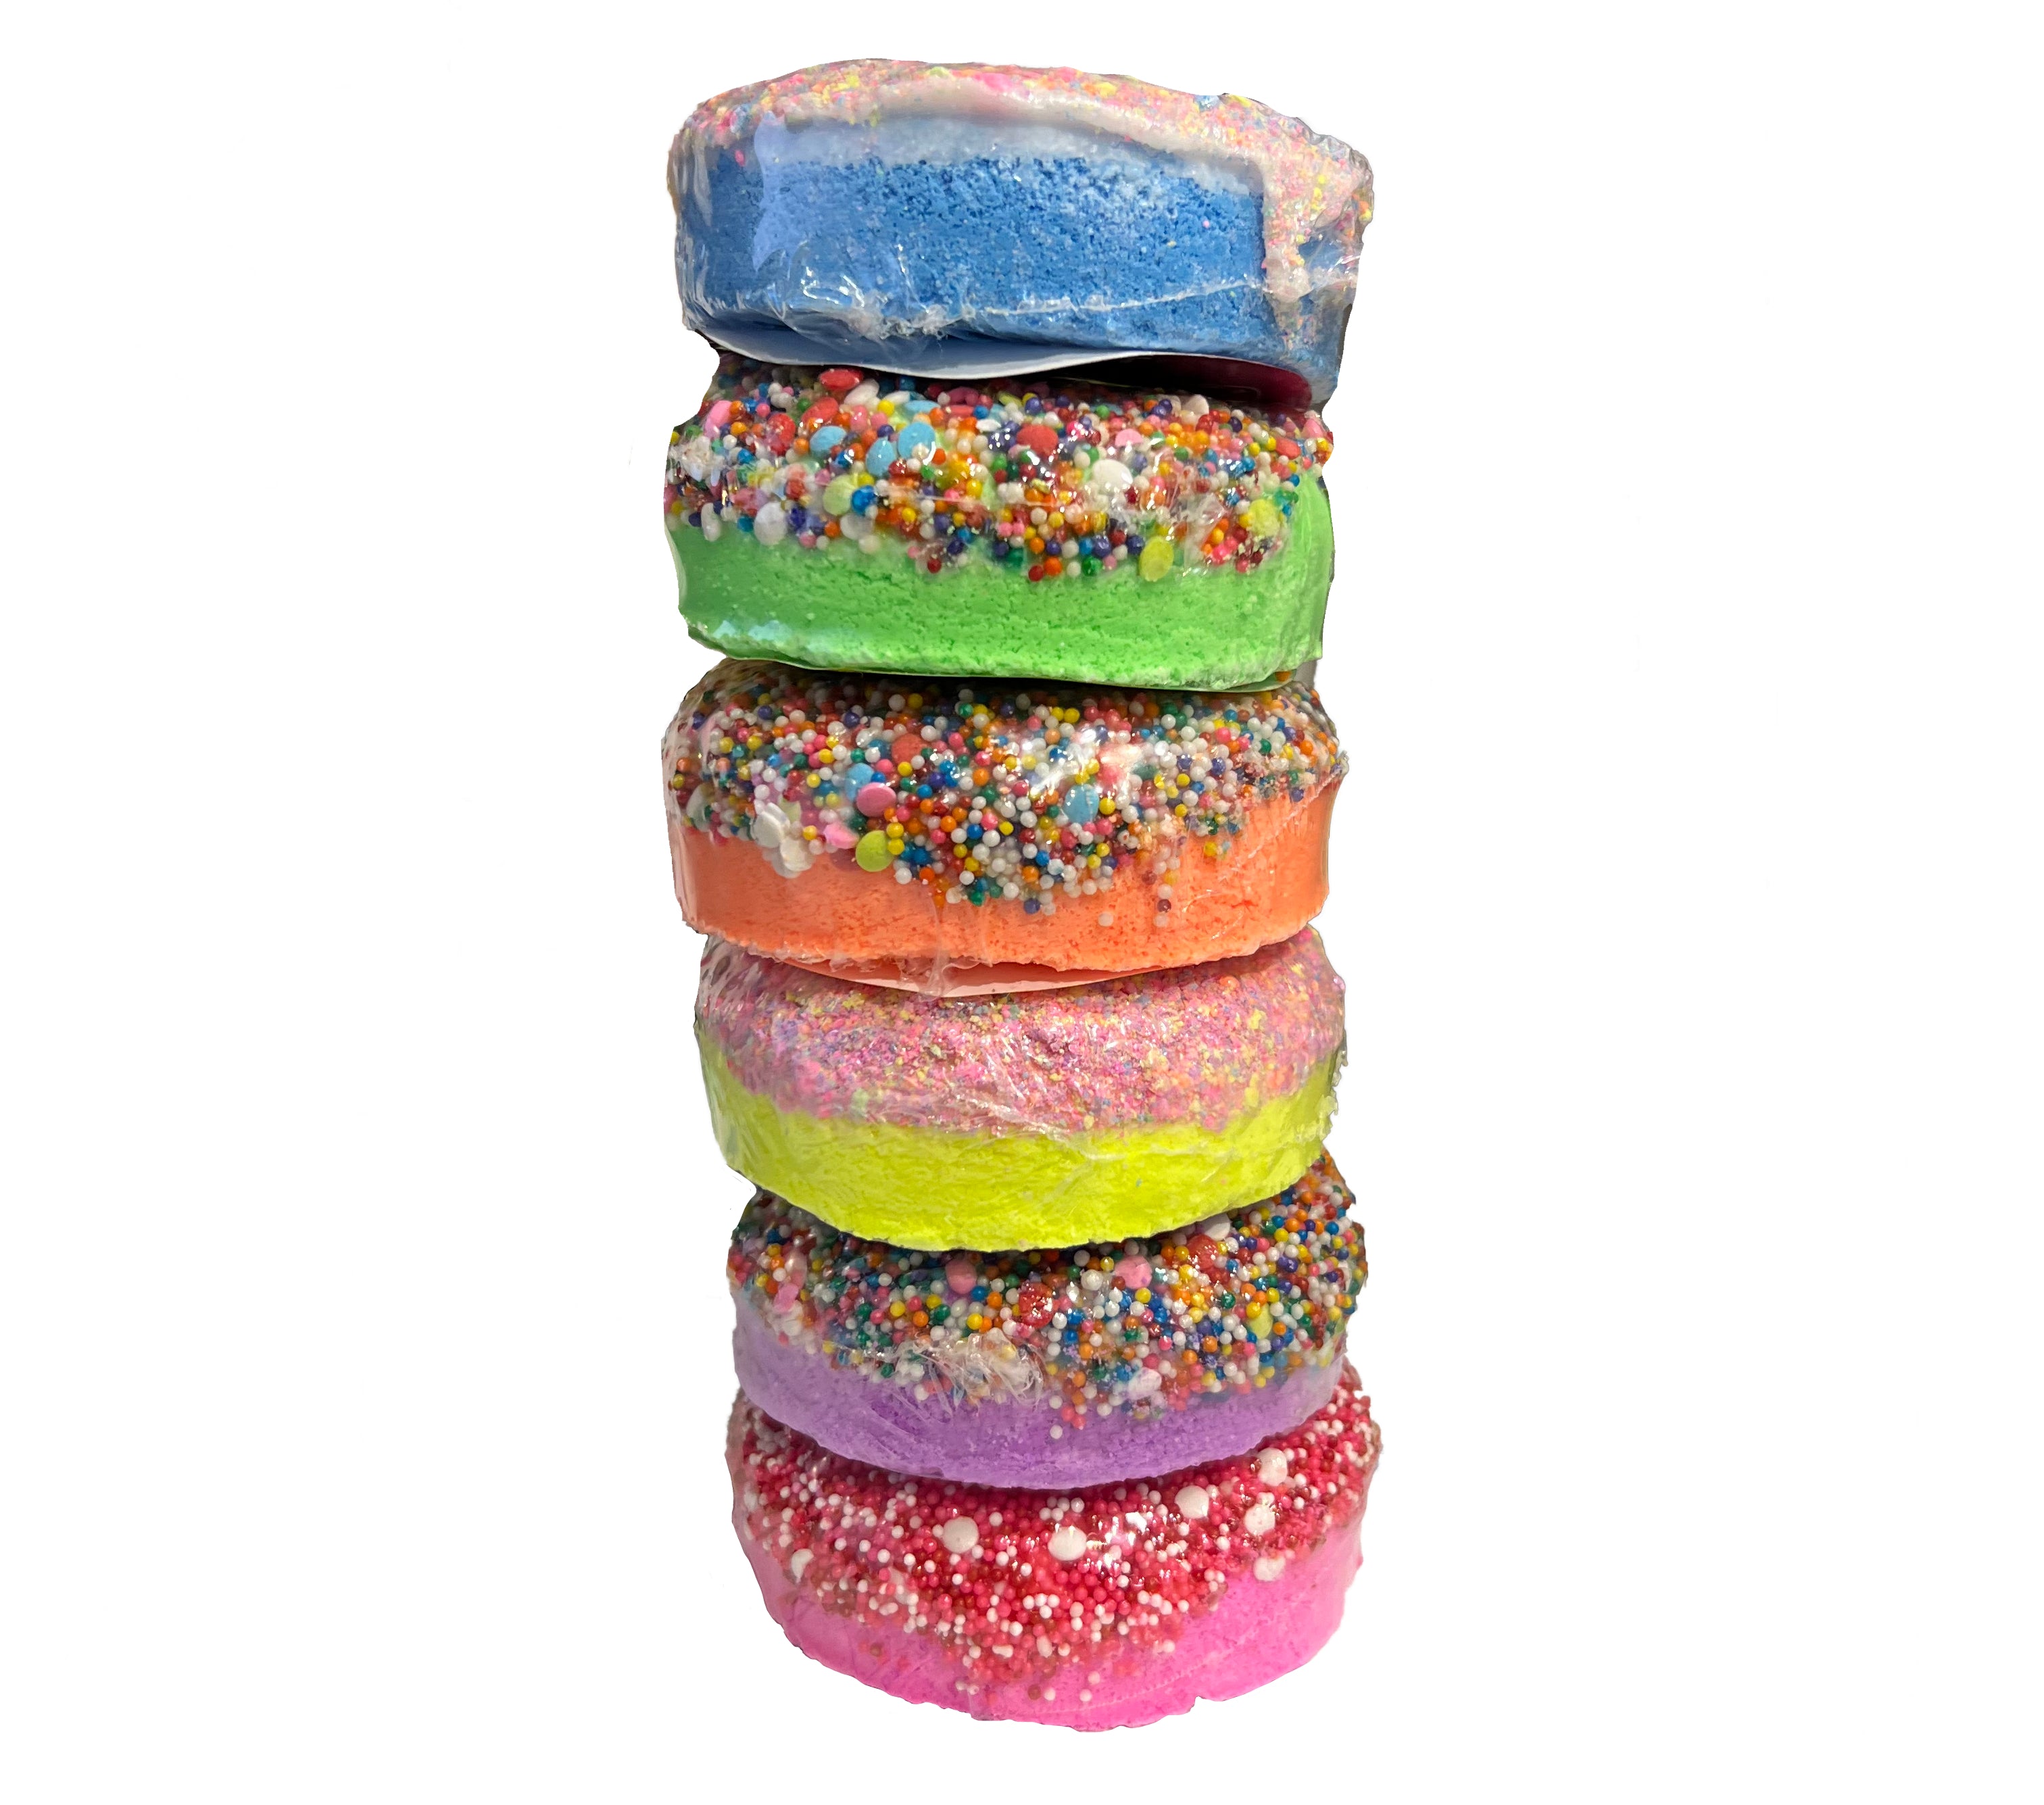 Assorted Donut Bath Bombs – Sold Individually